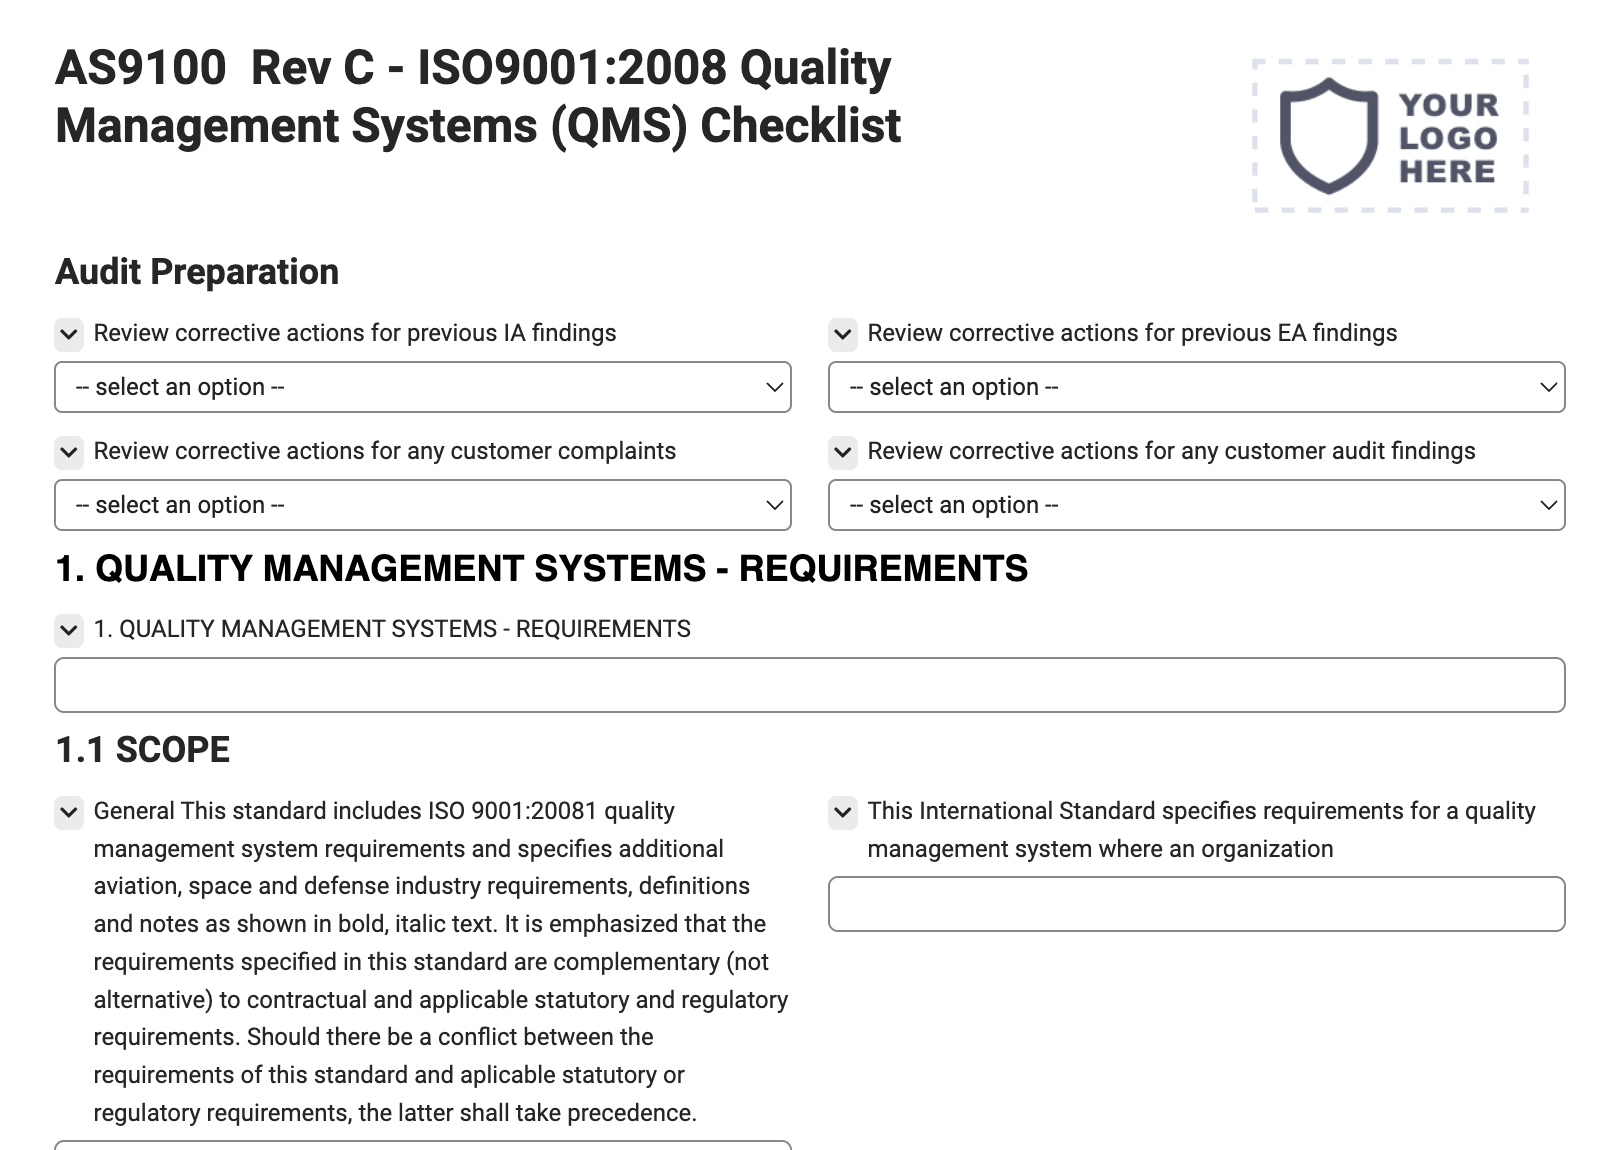 AS9100 Rev C - ISO9001:2008 Quality Management Systems (QMS) Checklist